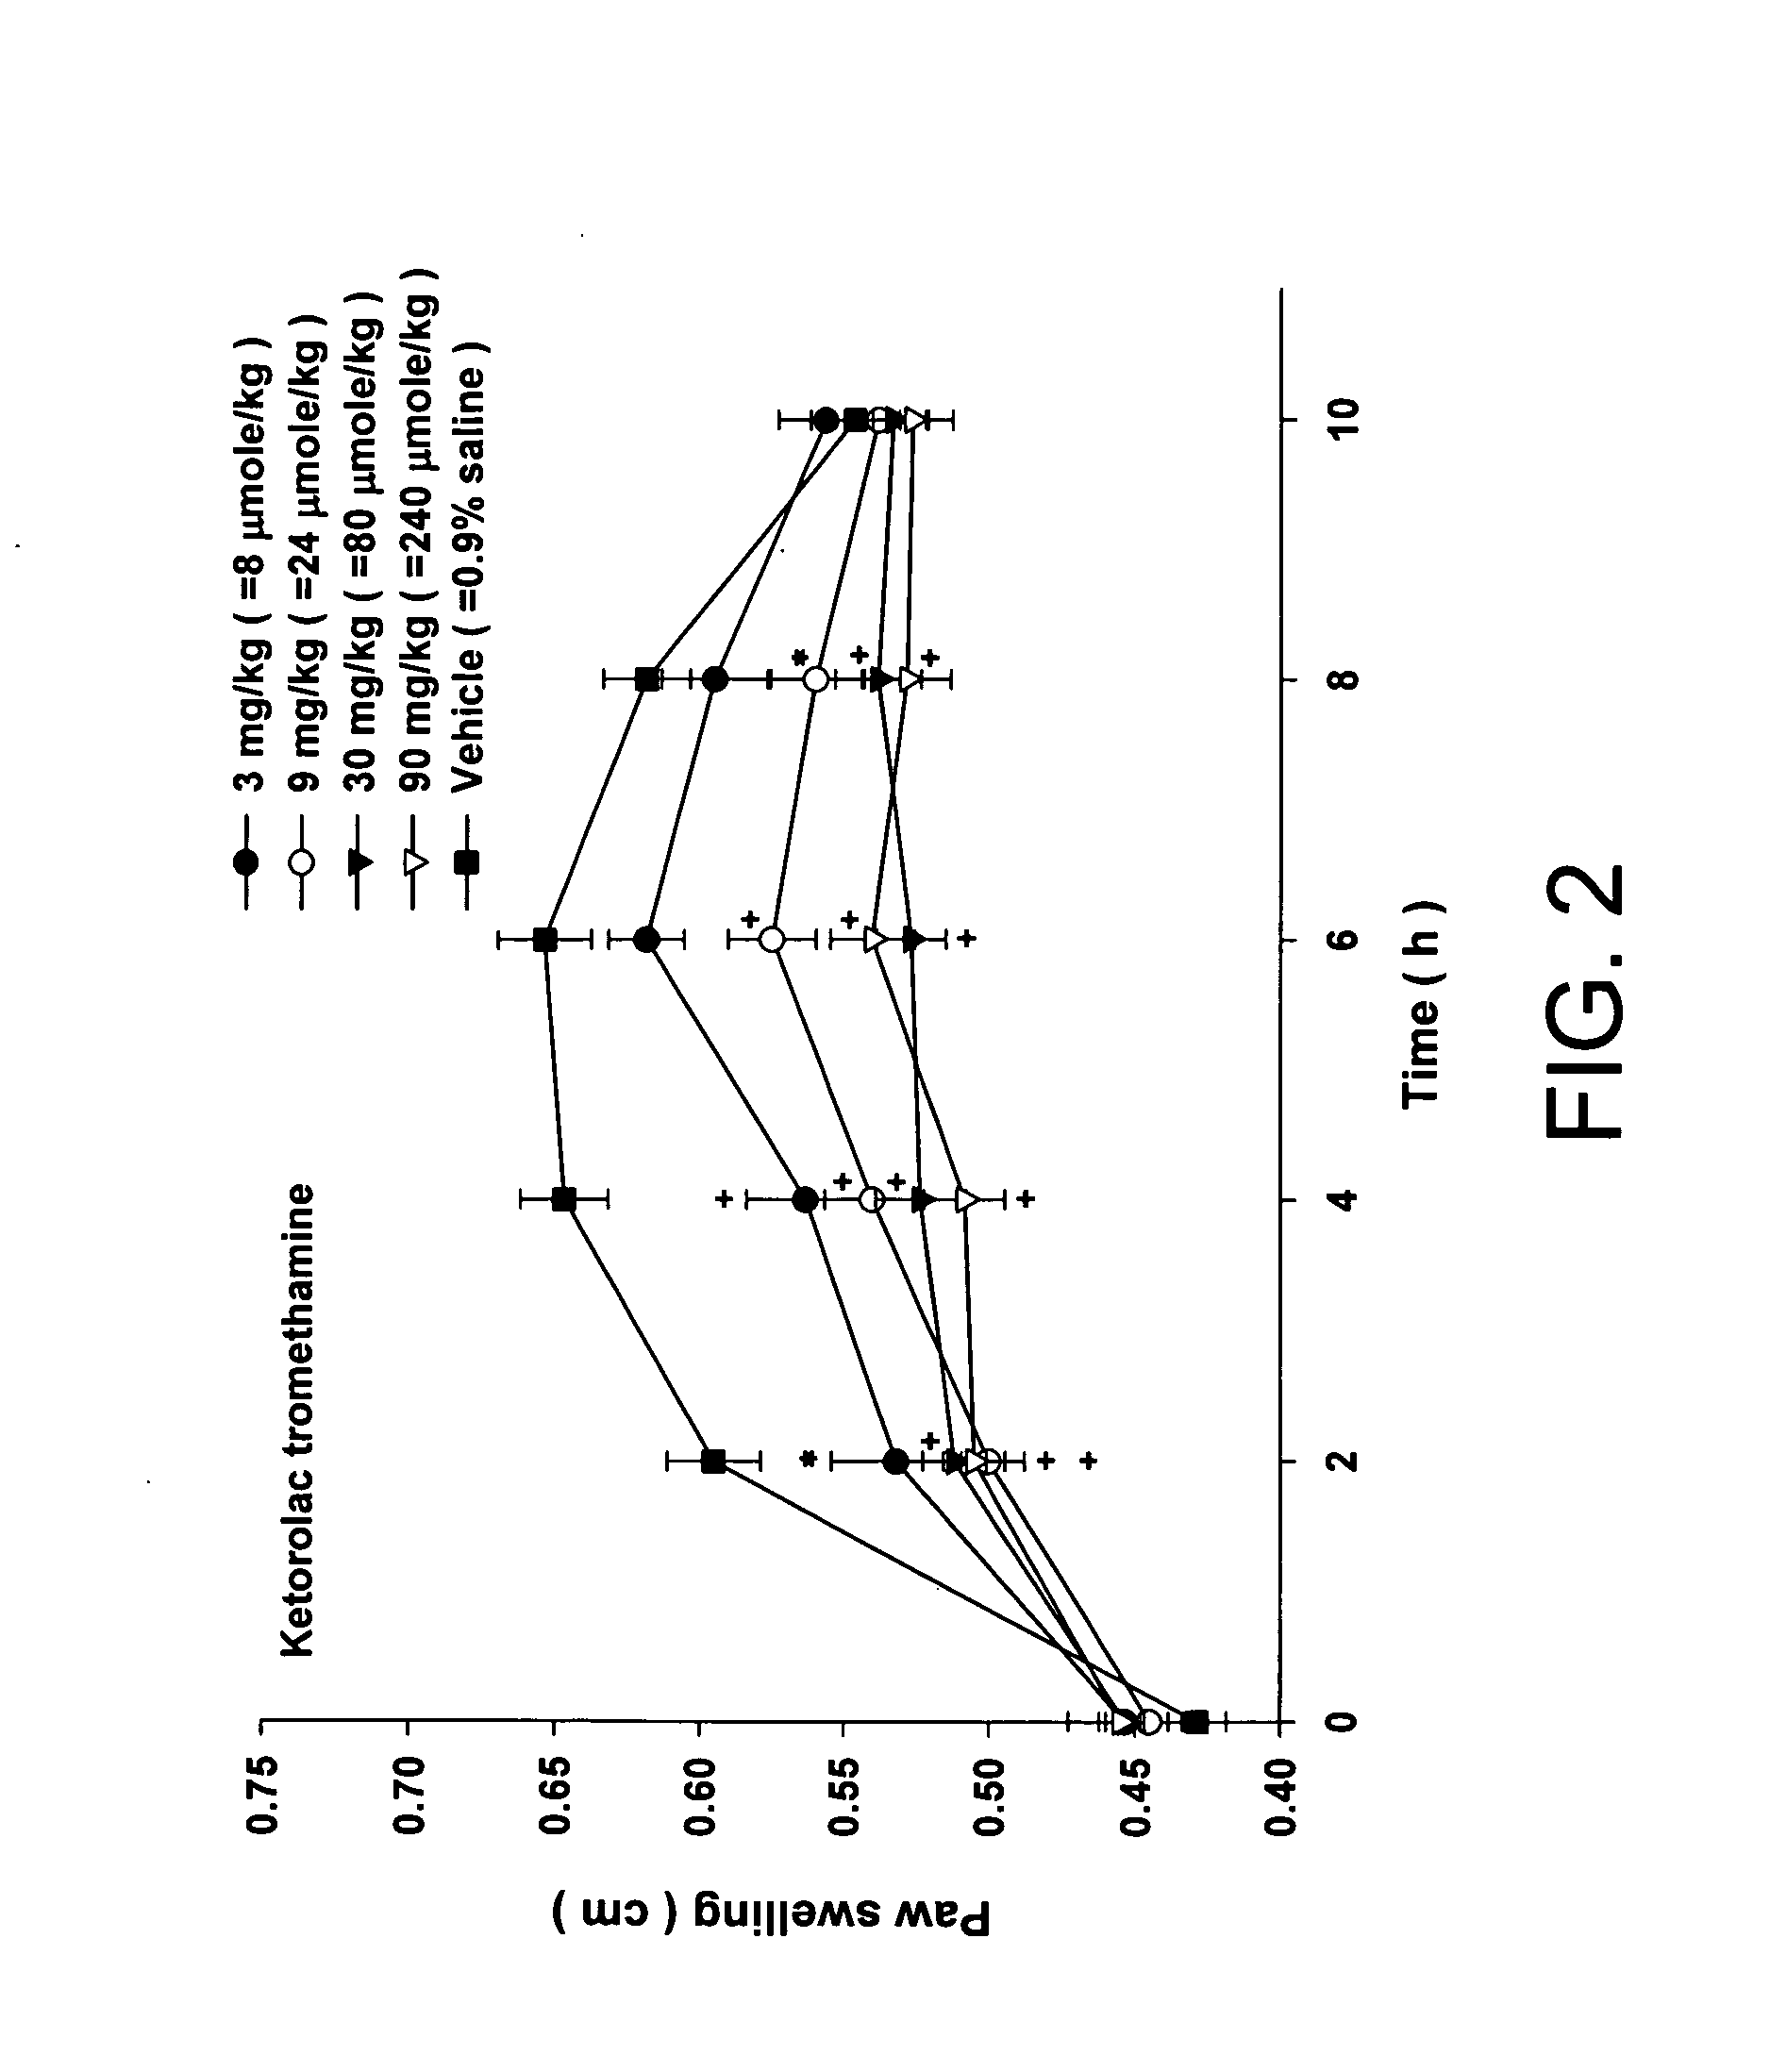 Injectable long-acting analgesic composition comprising an ester derivative of ketorolac